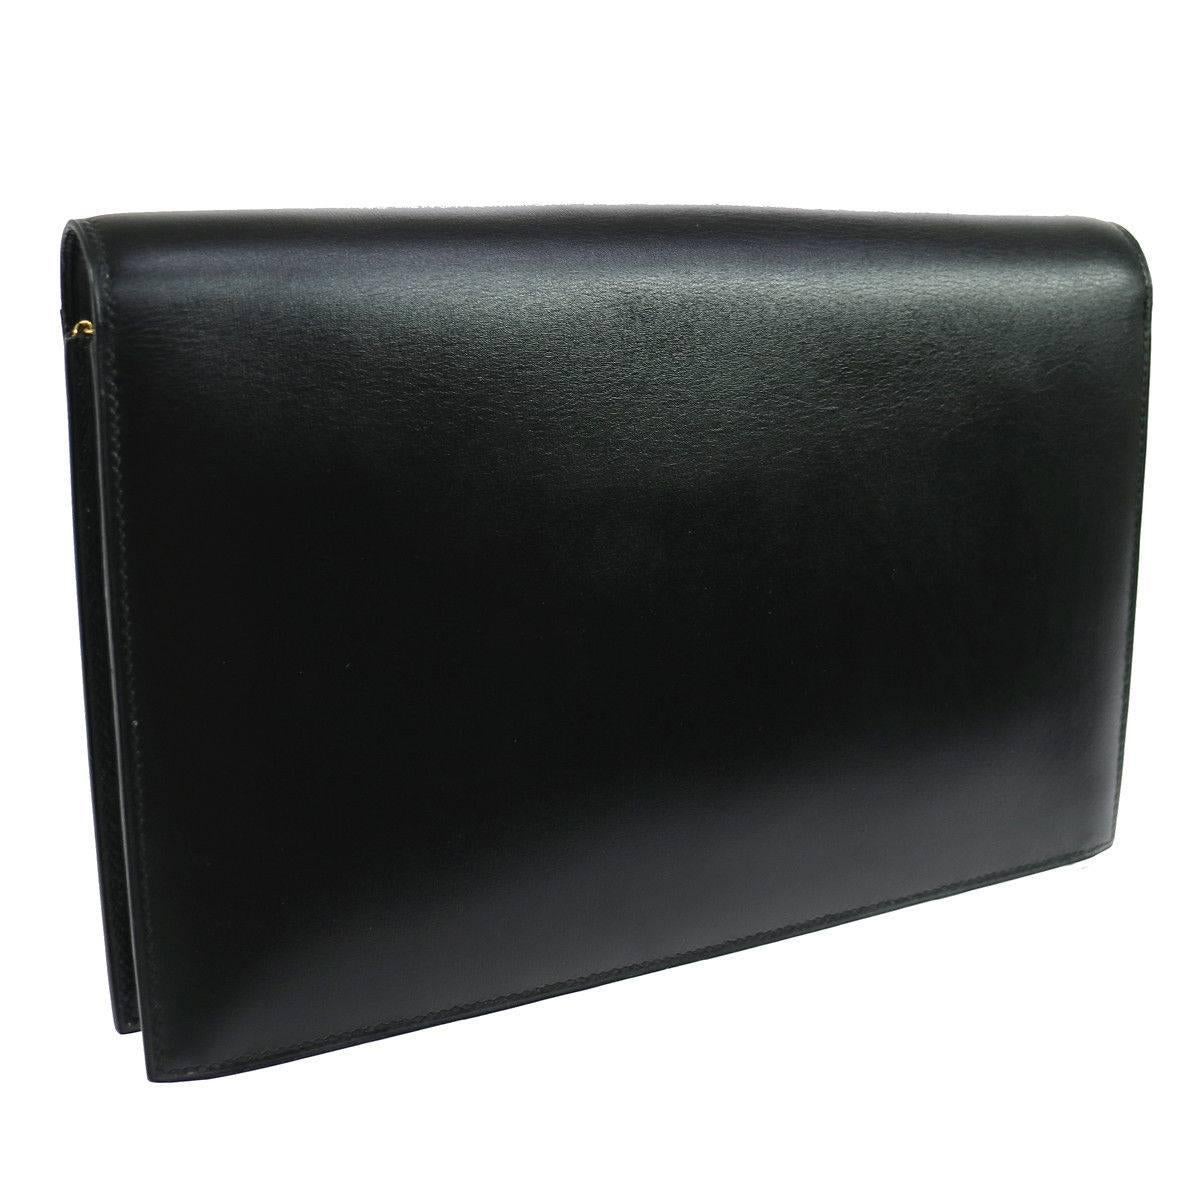 CURATOR'S NOTES

Hermes Black Leather Gold H Lock Charm Top Handle Envelope Evening Clutch Flap Bag

Leather
Gold tone hardware
Leather lining
Snap closure
Made in France
Date code Circle U
Measures 10.25